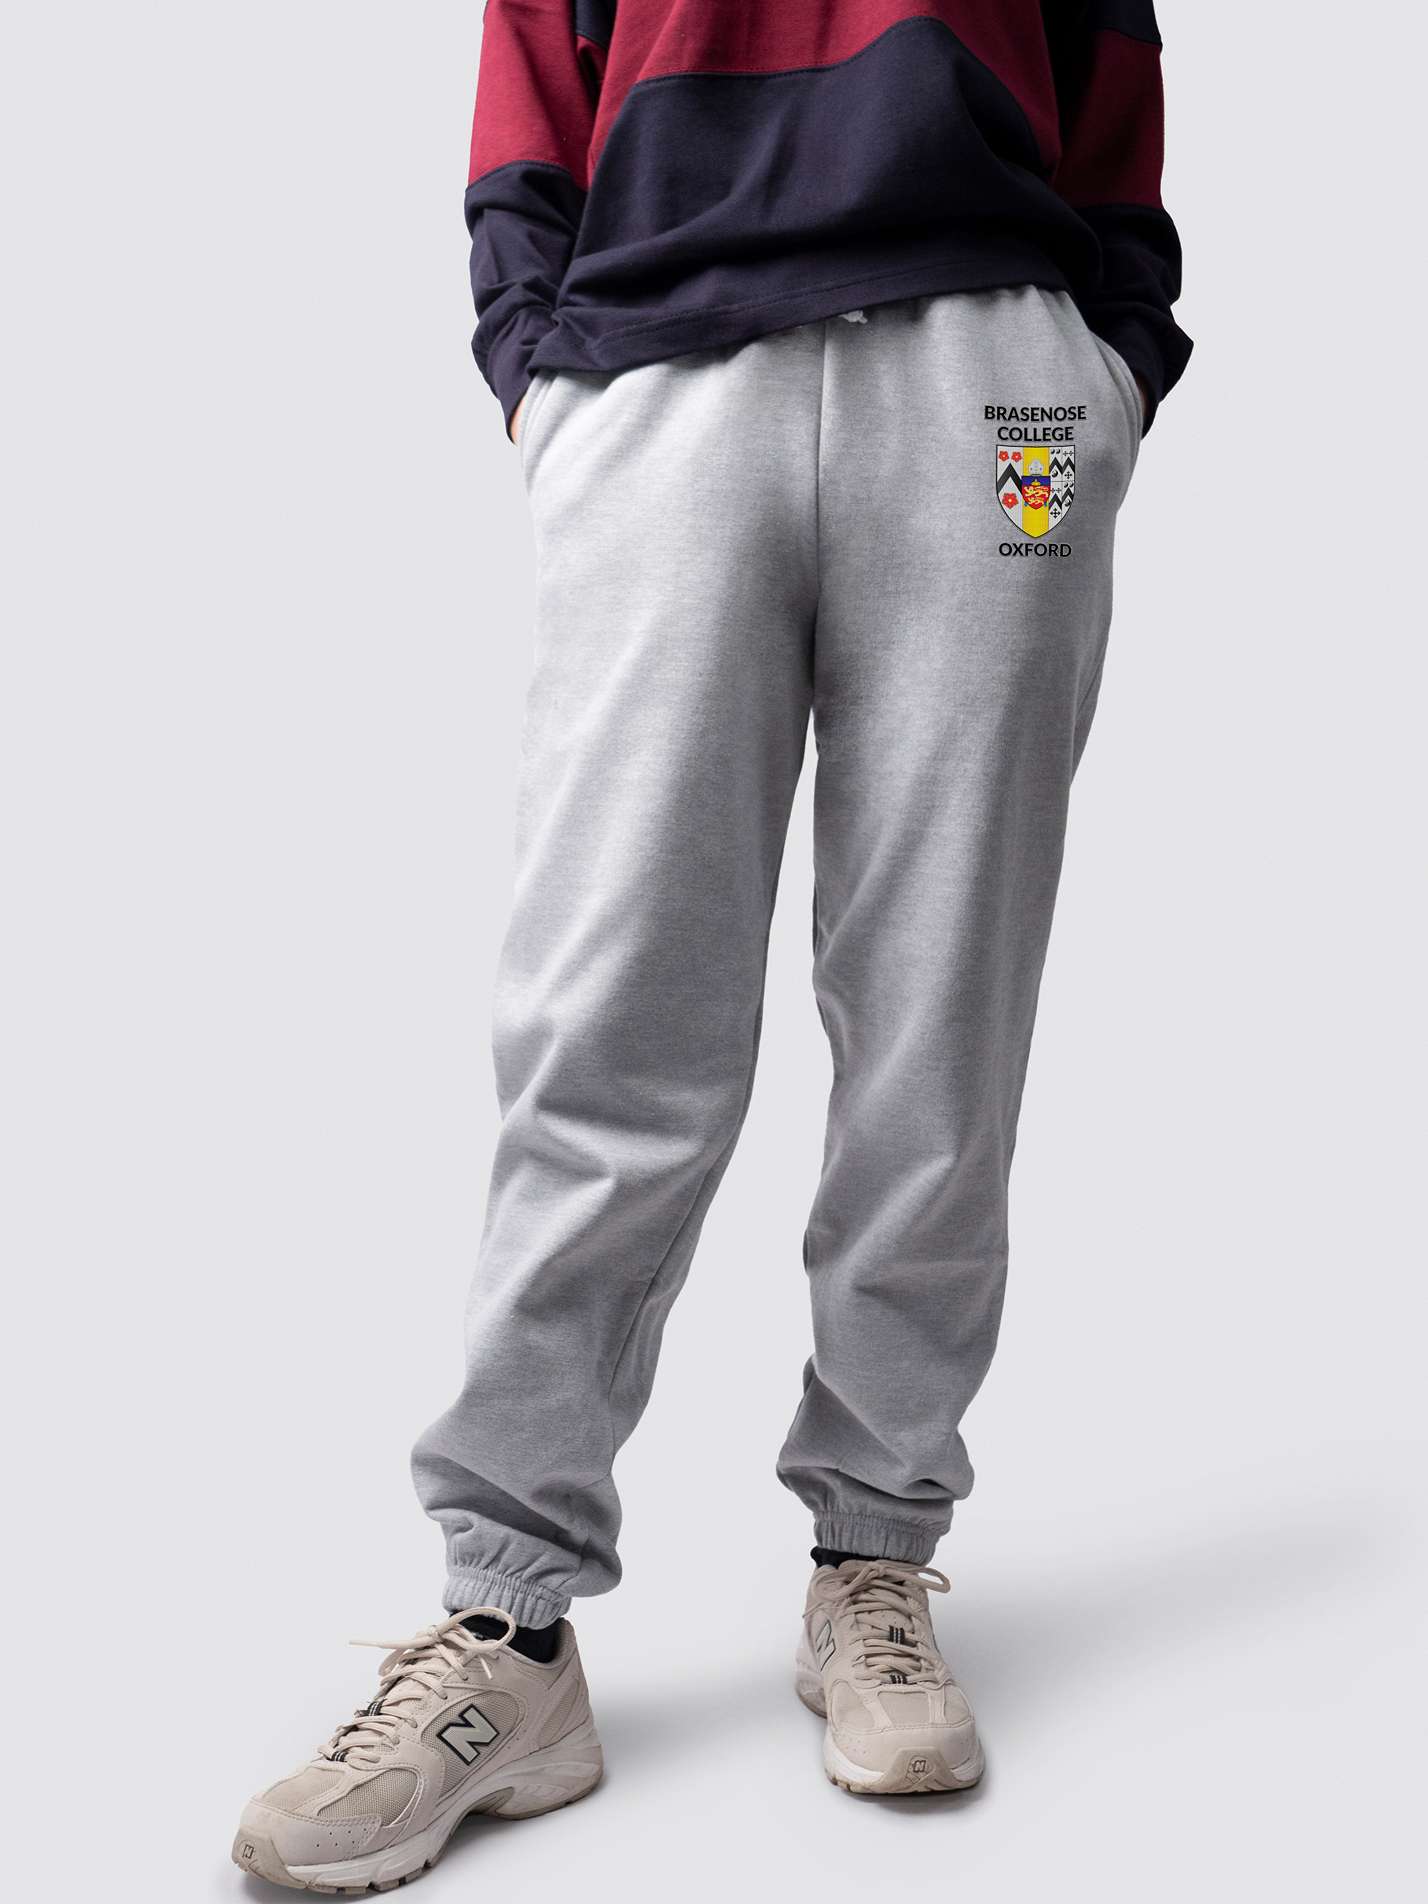 undergraduate cuffed sweatpants, made from soft cotton fabric, with Brasenose logo